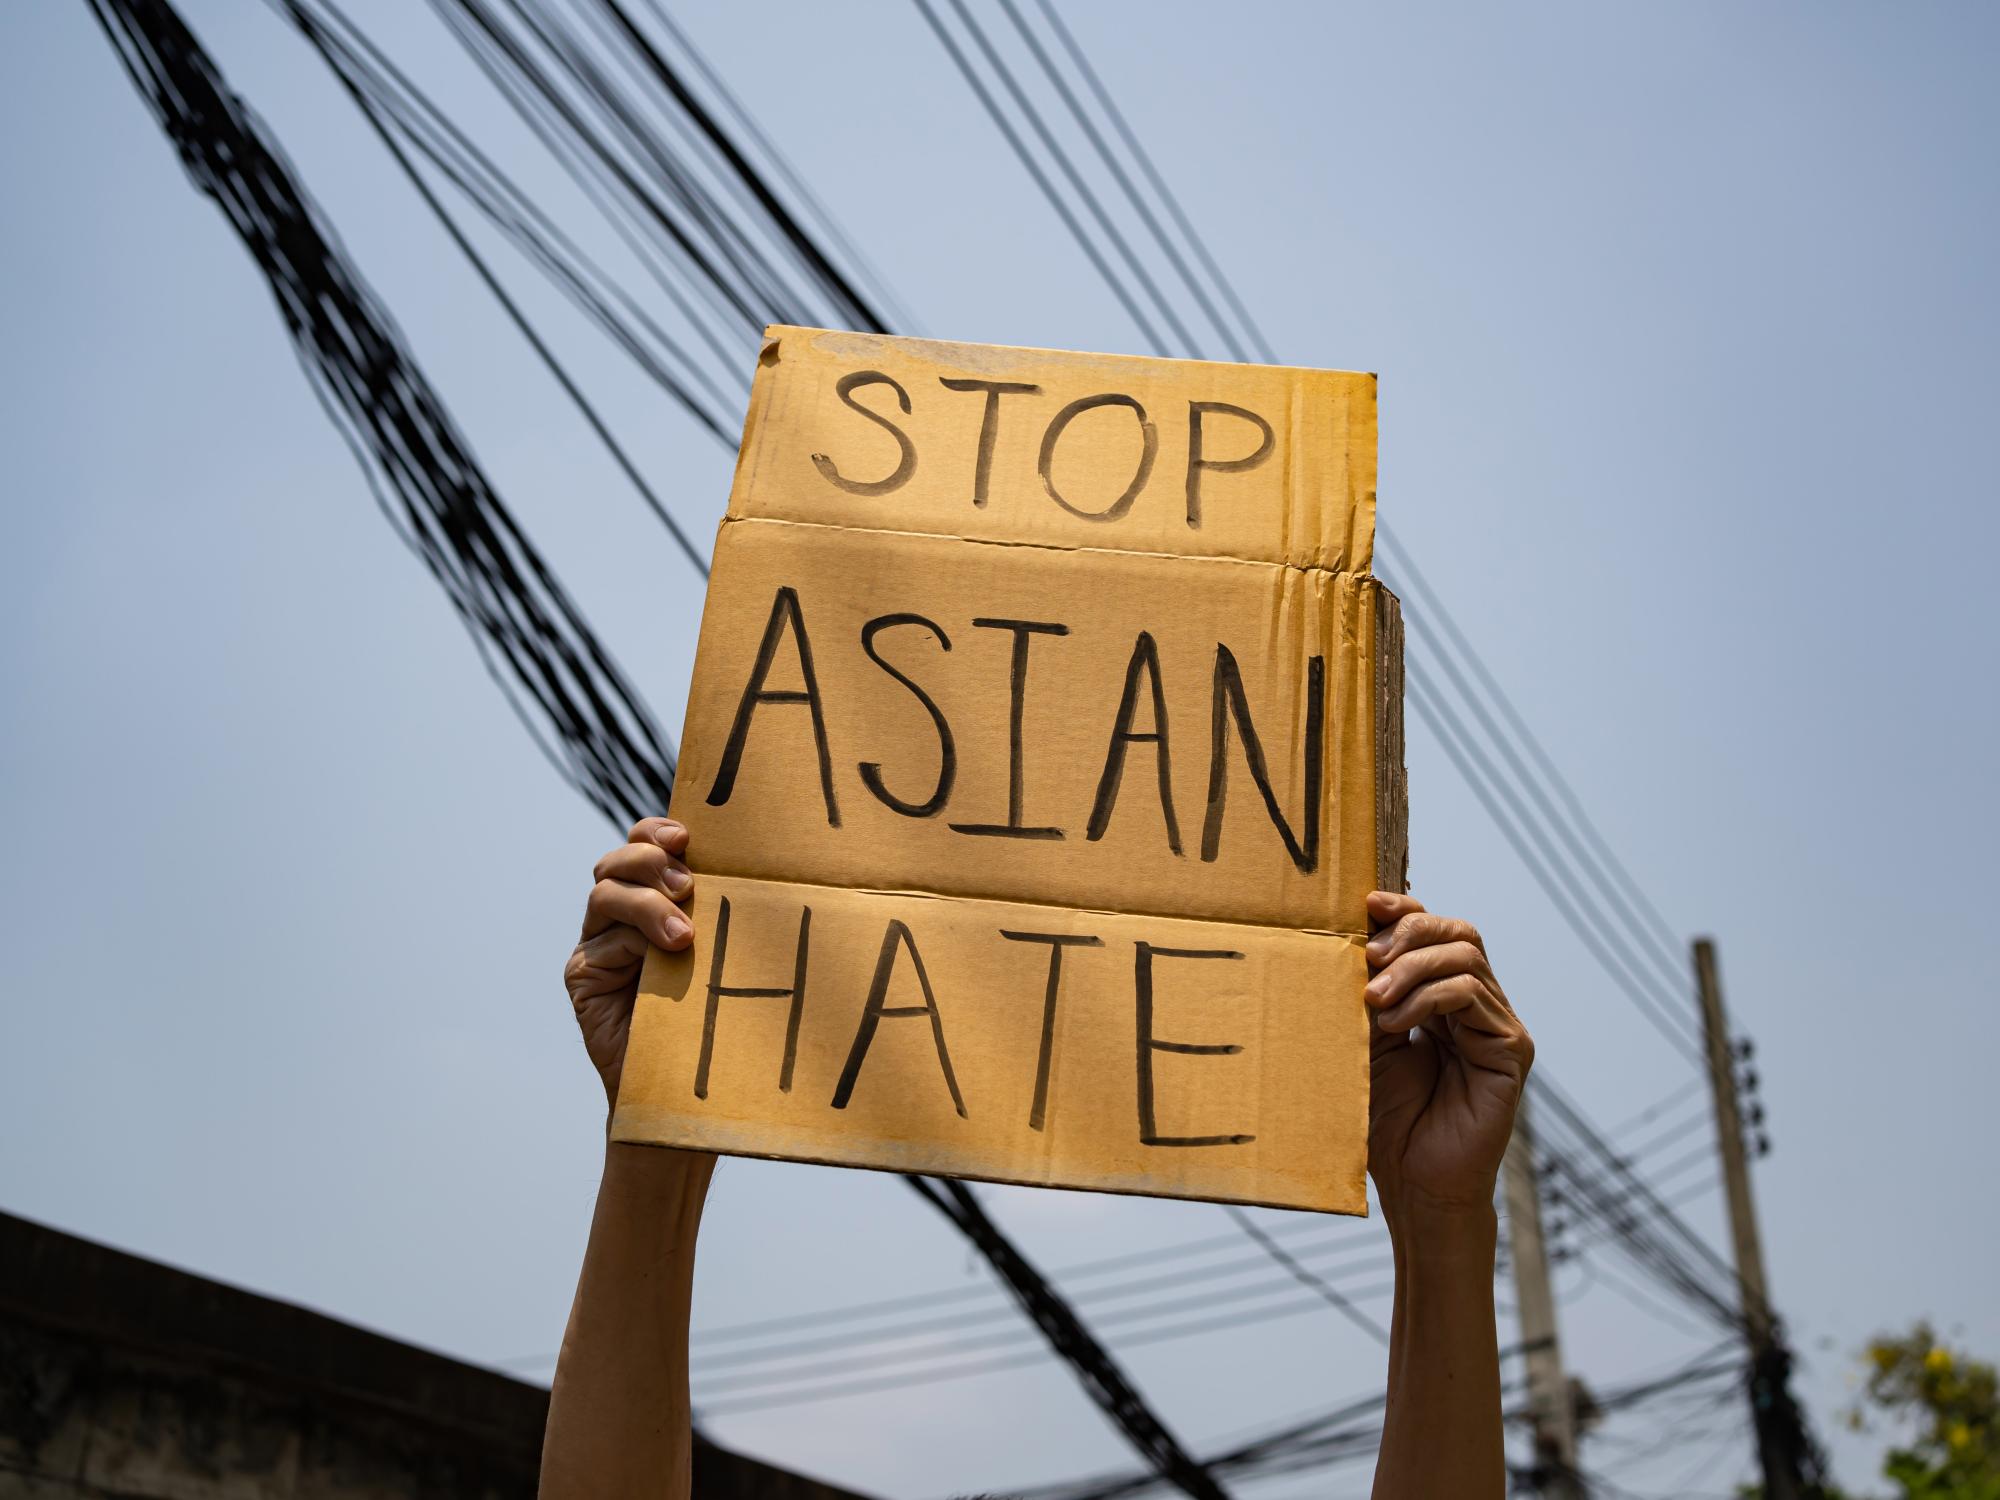 Word Choice and Media Exposure Affected Anti-Asian Boycotts During the Pandemic